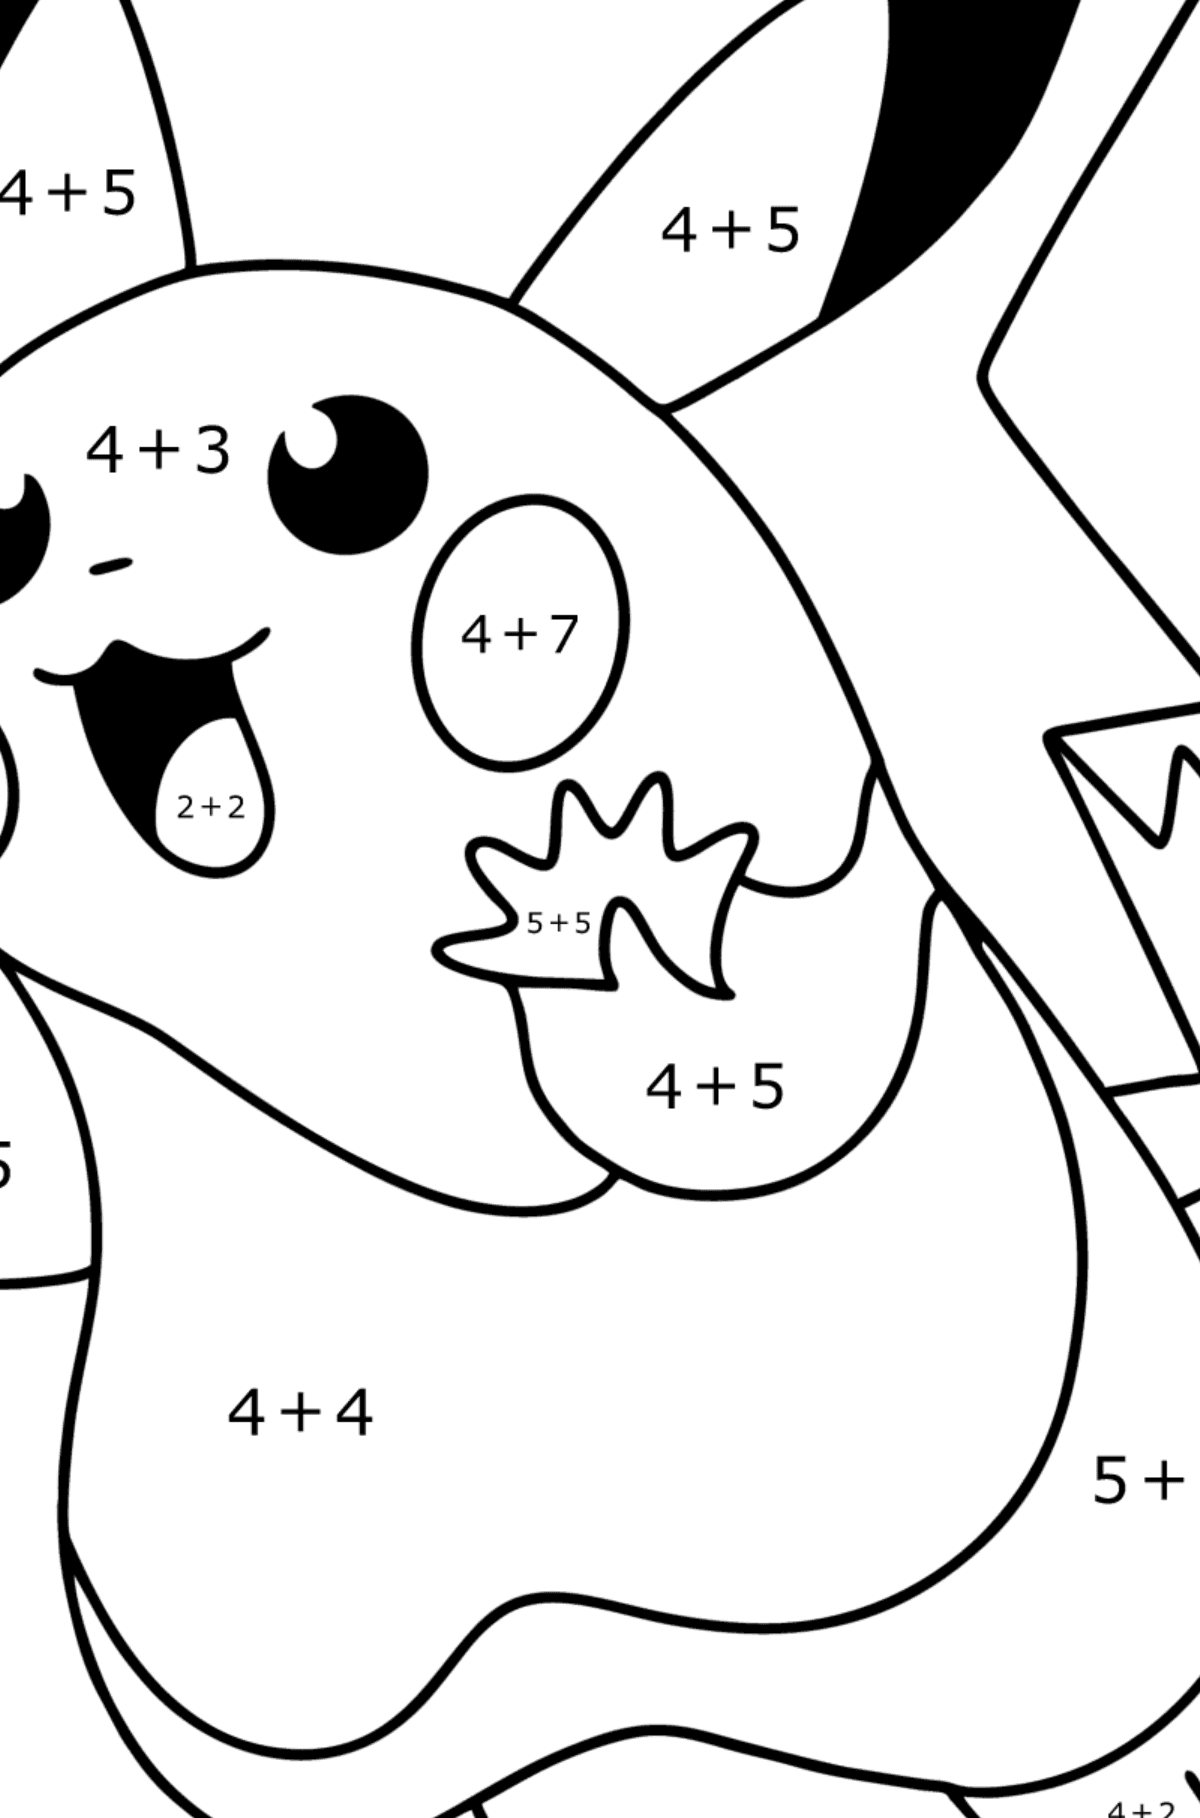 Coloring page Pokémon Go Picachu - Math Coloring - Addition for Kids